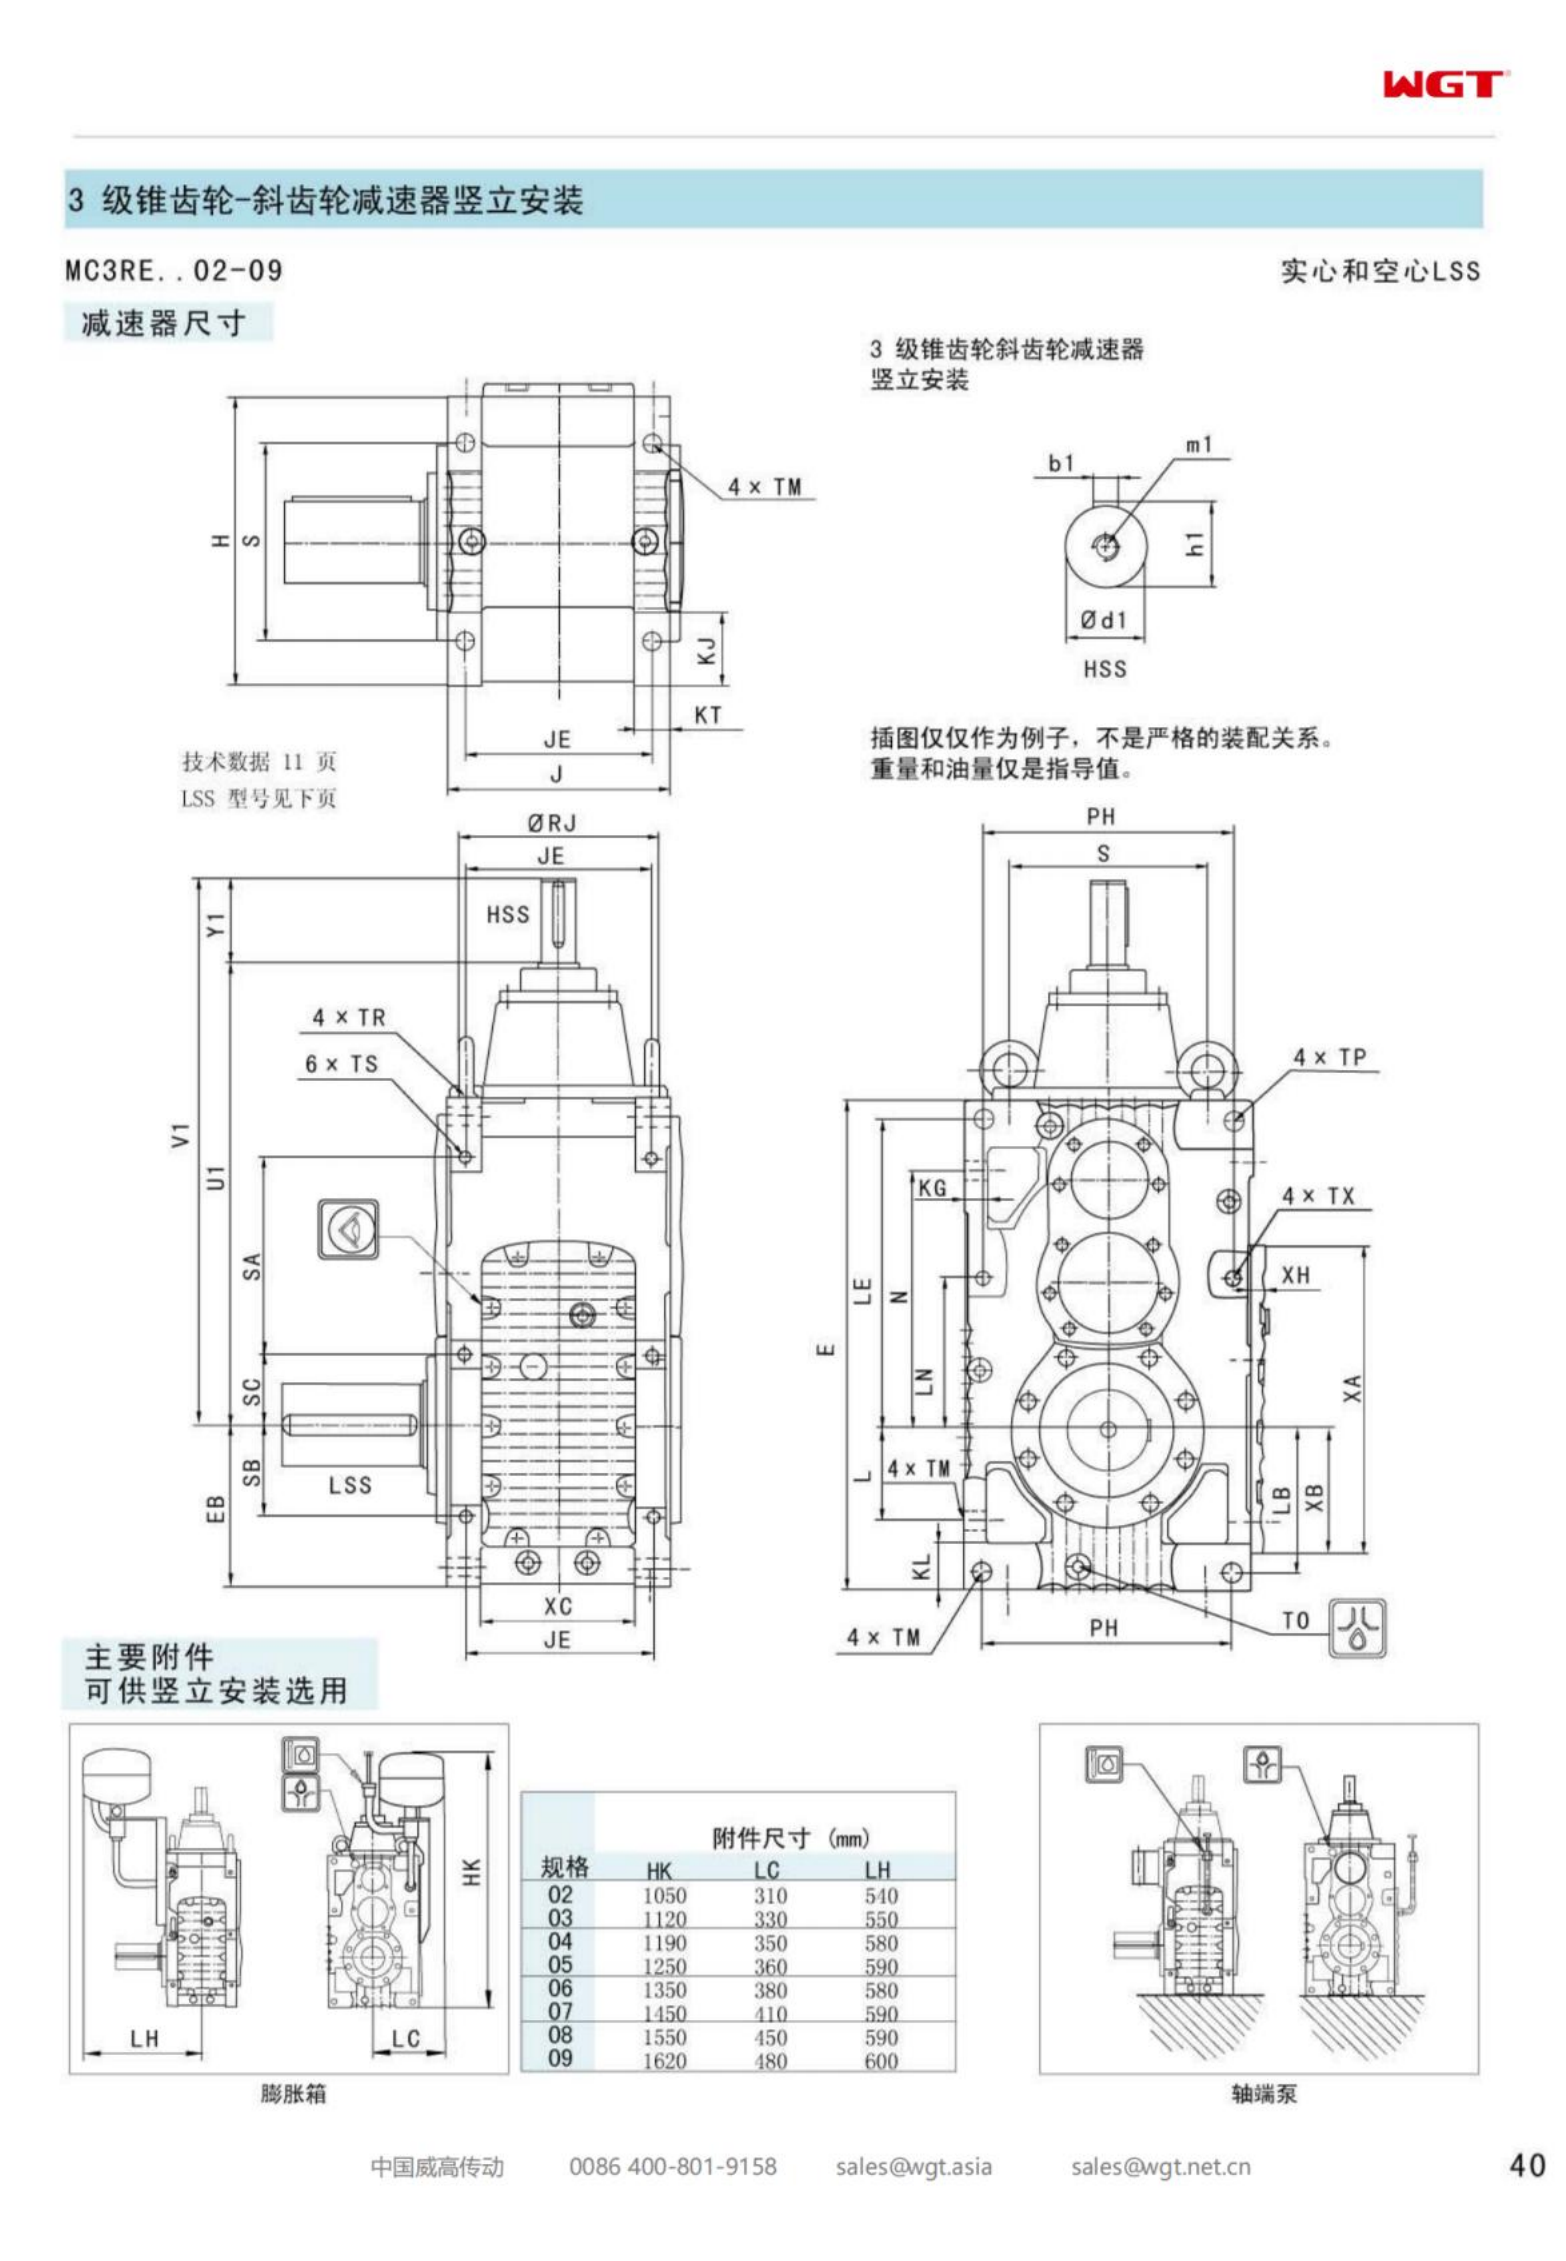 MC3RESF02 Replace_SEW_MC_Series Gearbox